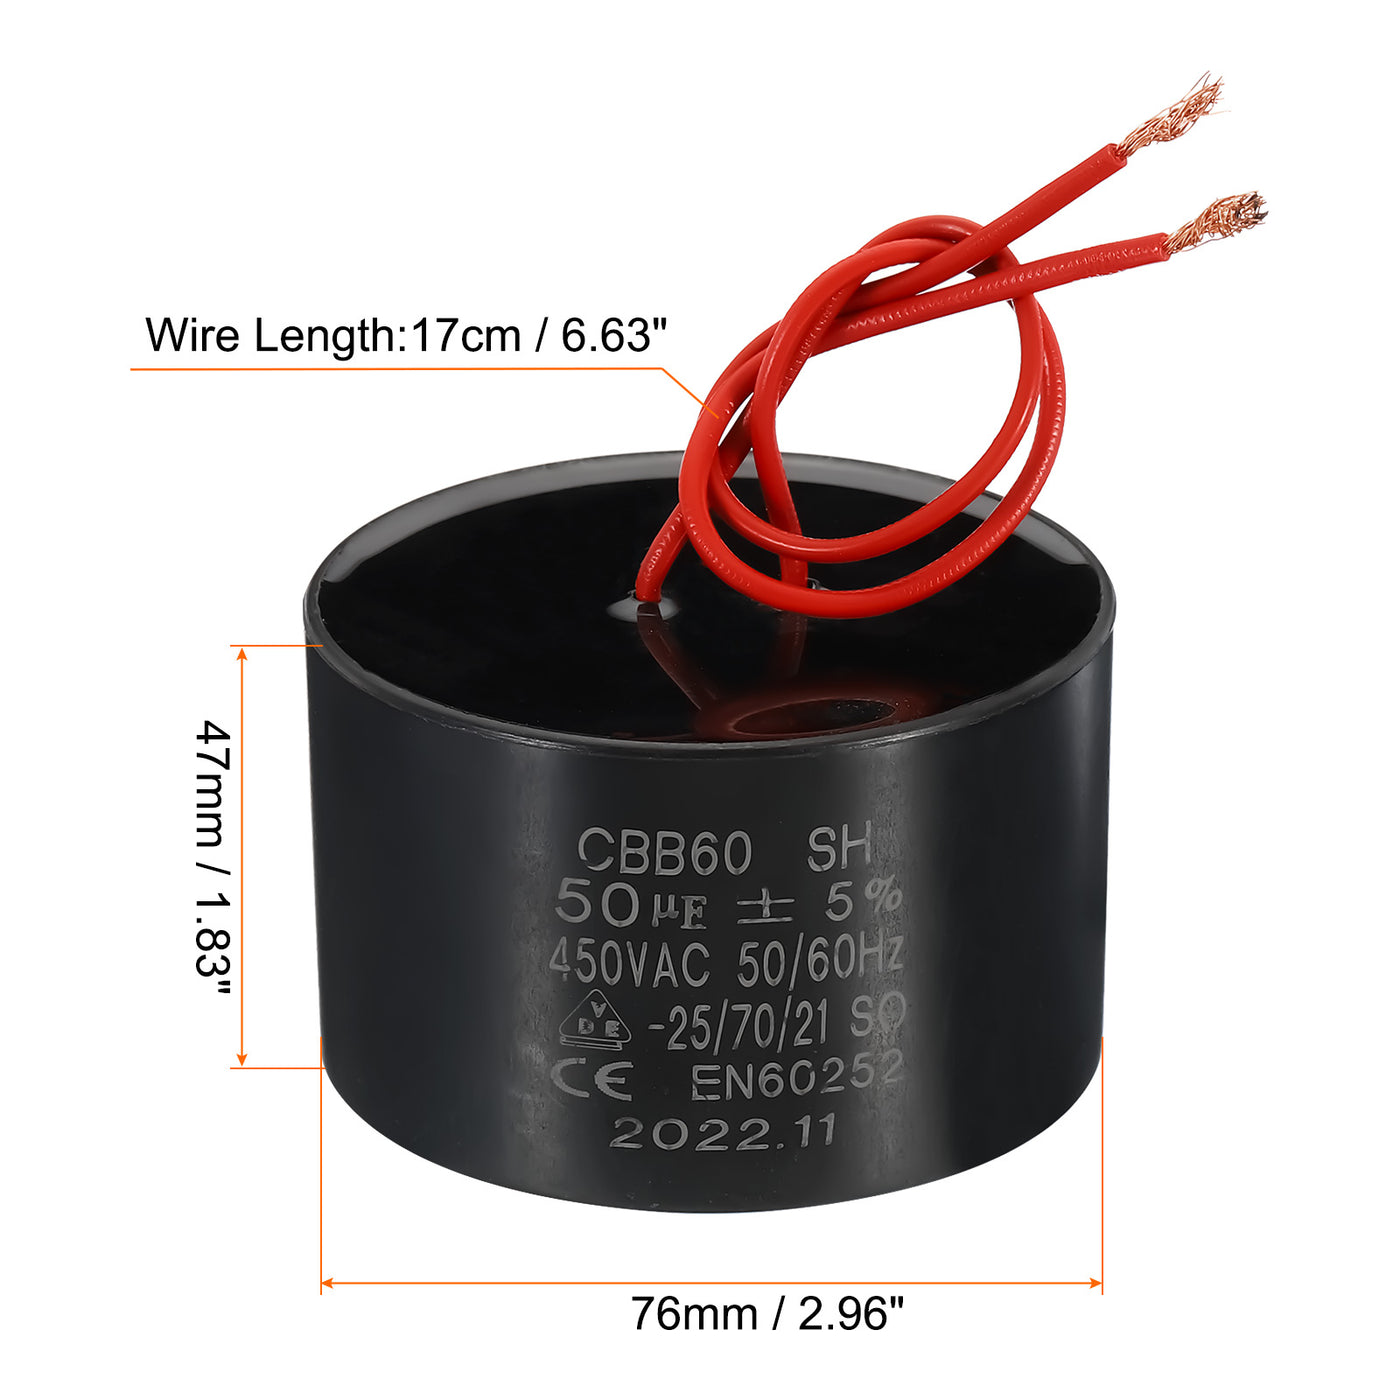 Harfington CBB60 50uf Running Capacitor,AC 450V 50/60Hz with 2 Red Wires 17cm for Water Pump